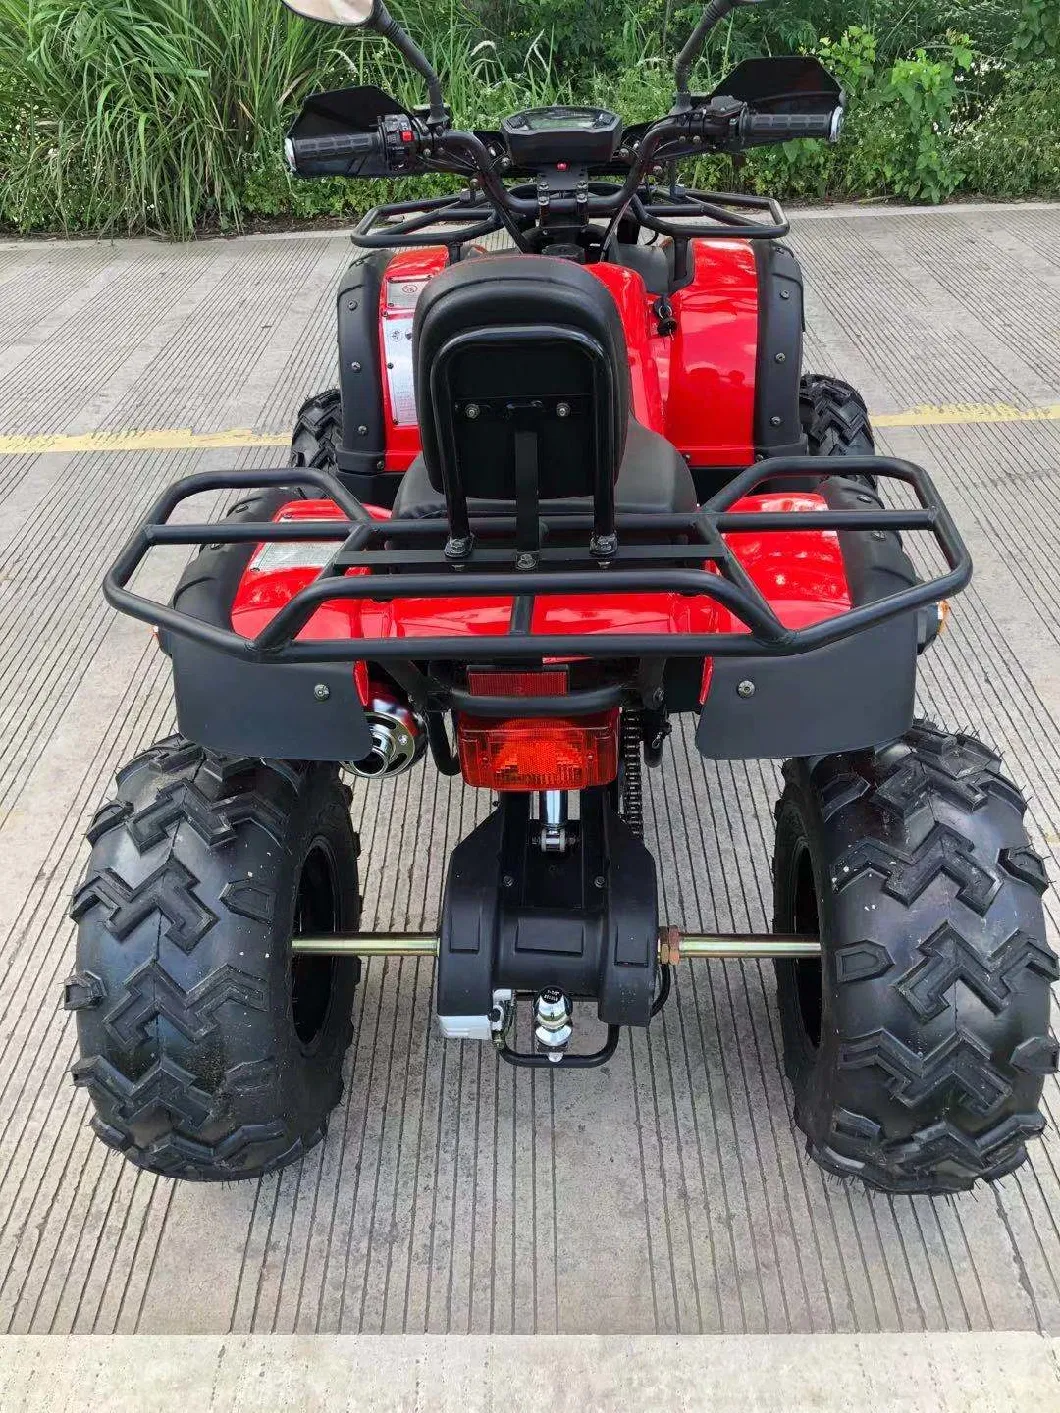 4 Wheeler ATV 200cc Racing Motorcycles Automatic Transmission for Adults